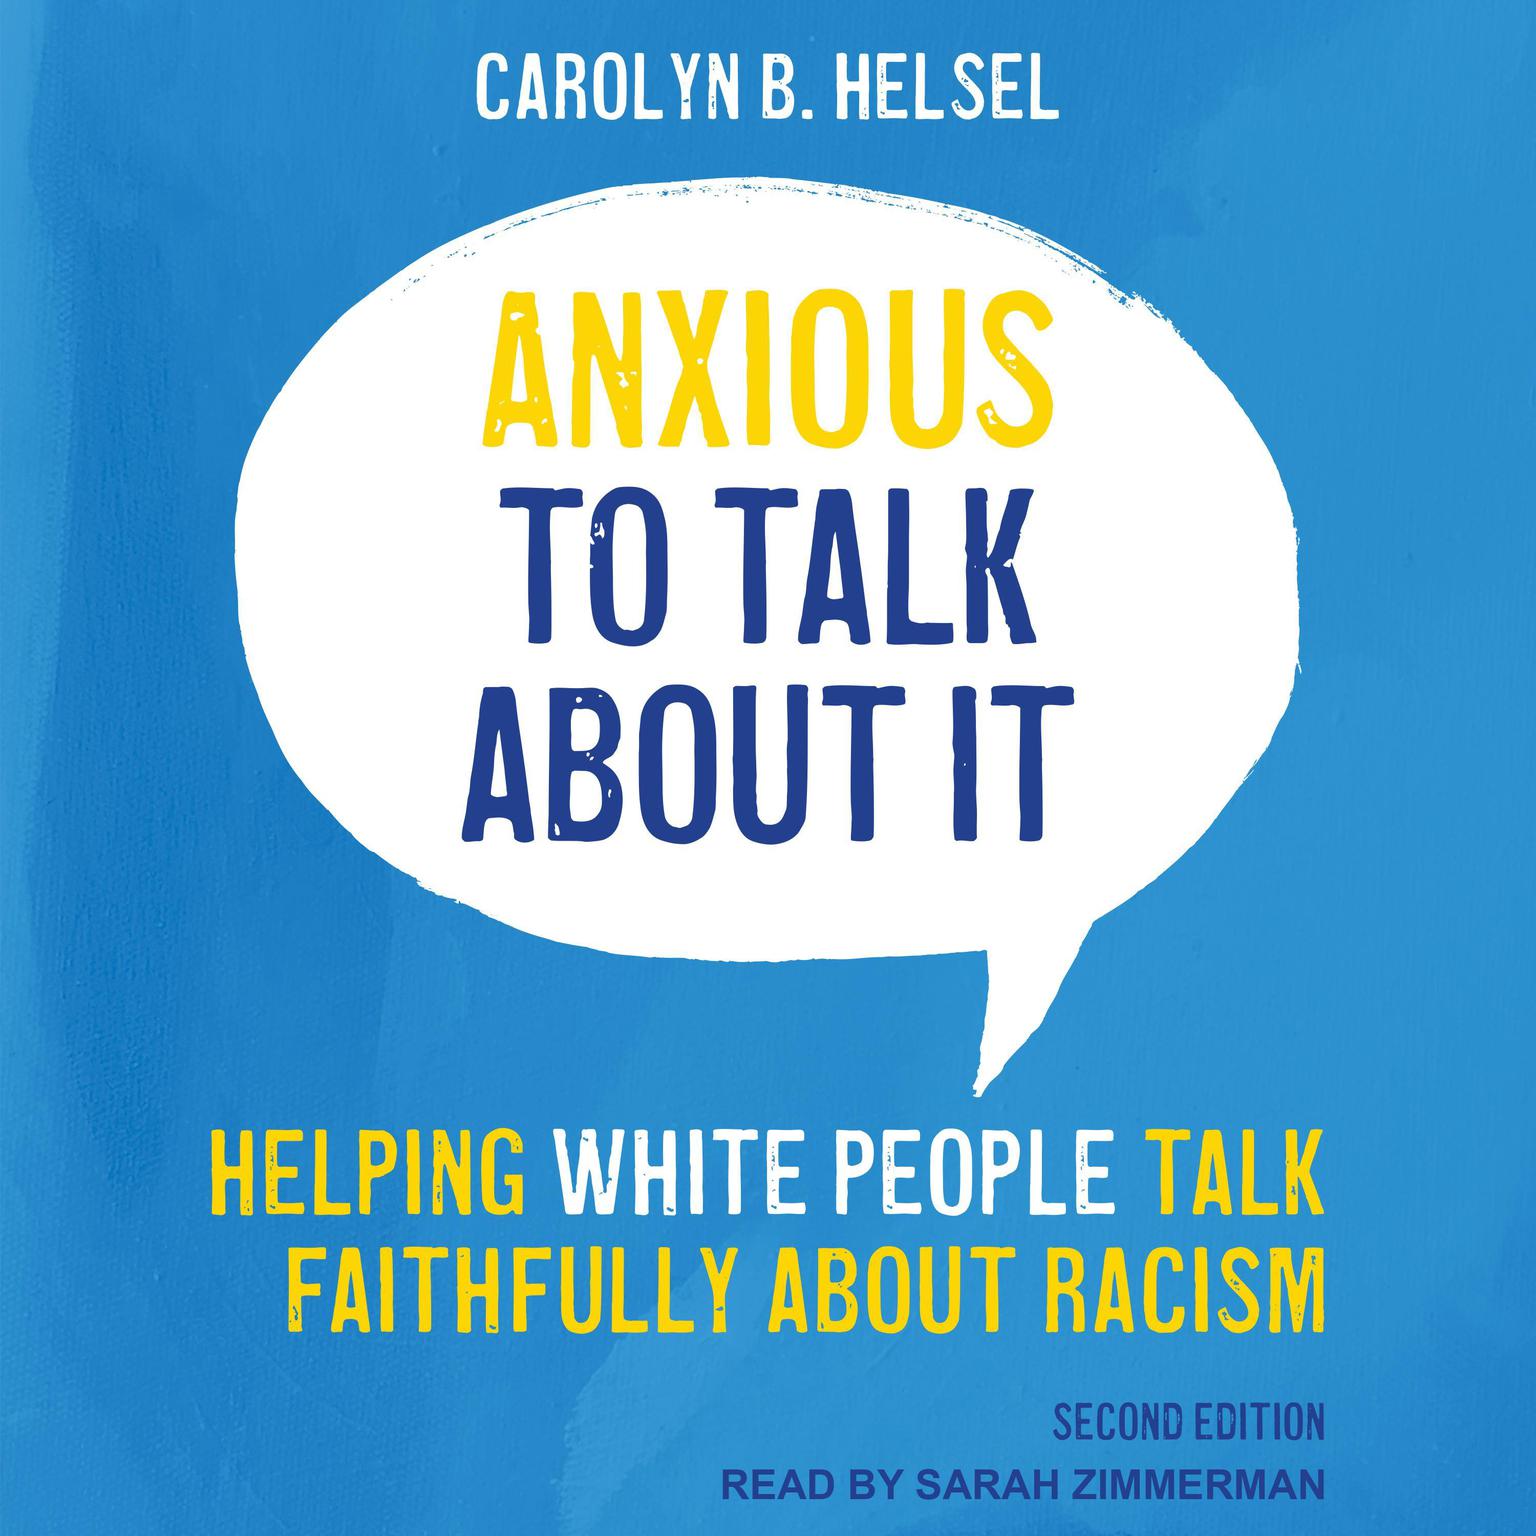 Anxious to Talk About It: Helping White People Talk Faithfully about Racism, Second Edition Audiobook, by Carolyn B. Helsel